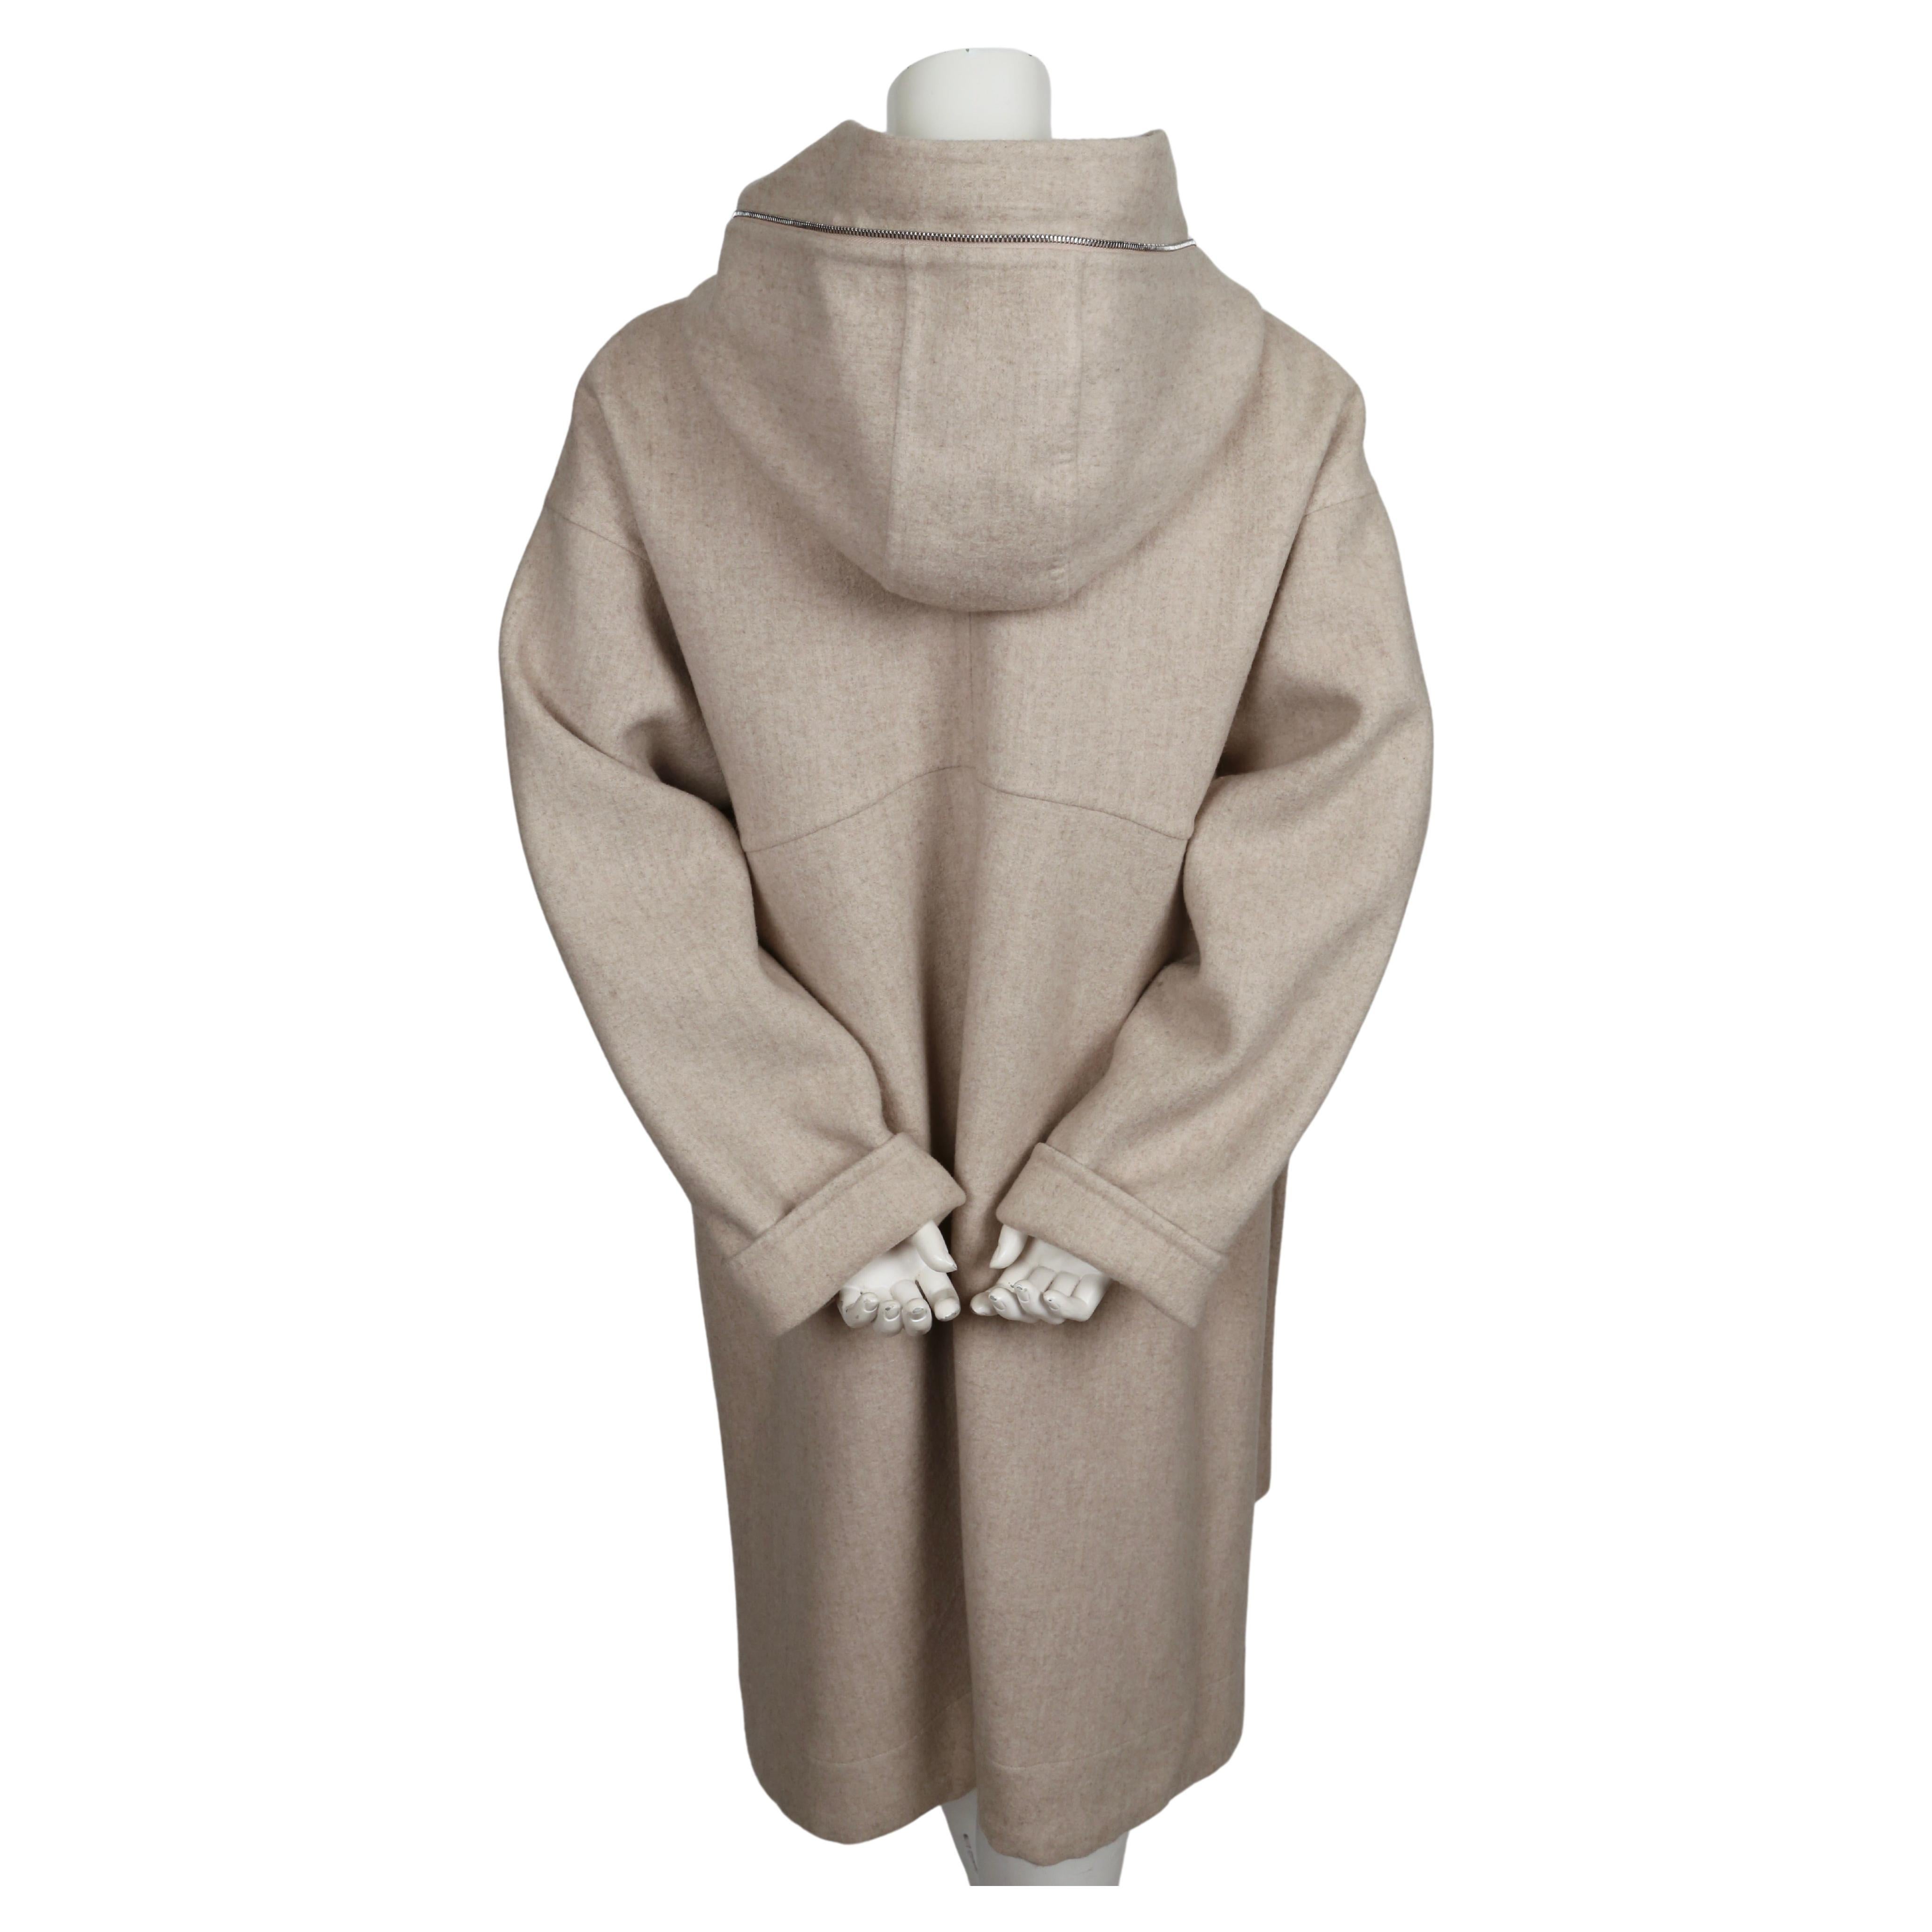 CELINE by PHOEBE PHILO oatmeal wool and cashmere coat with hood - resort 2016 For Sale 3